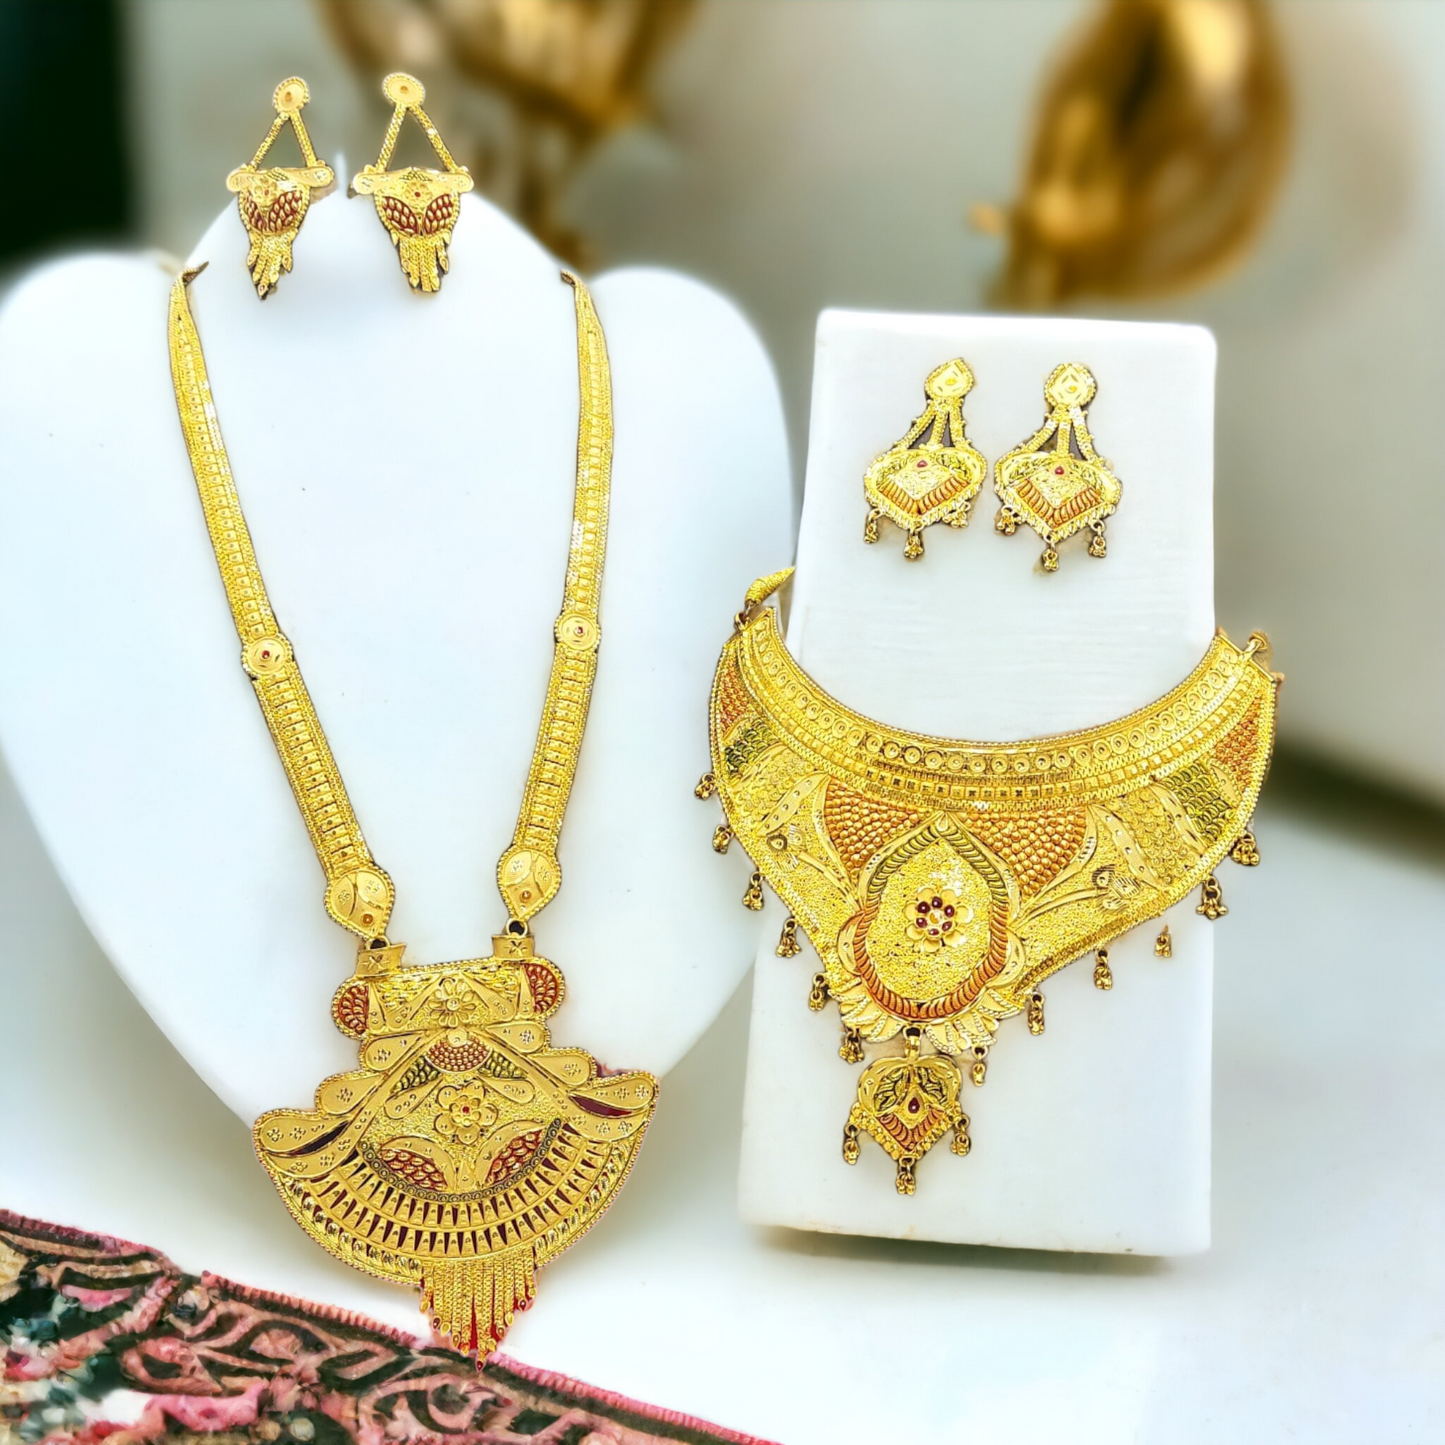 "Graceful Gold-Toned Jewelry Set with Coordinating Earrings"